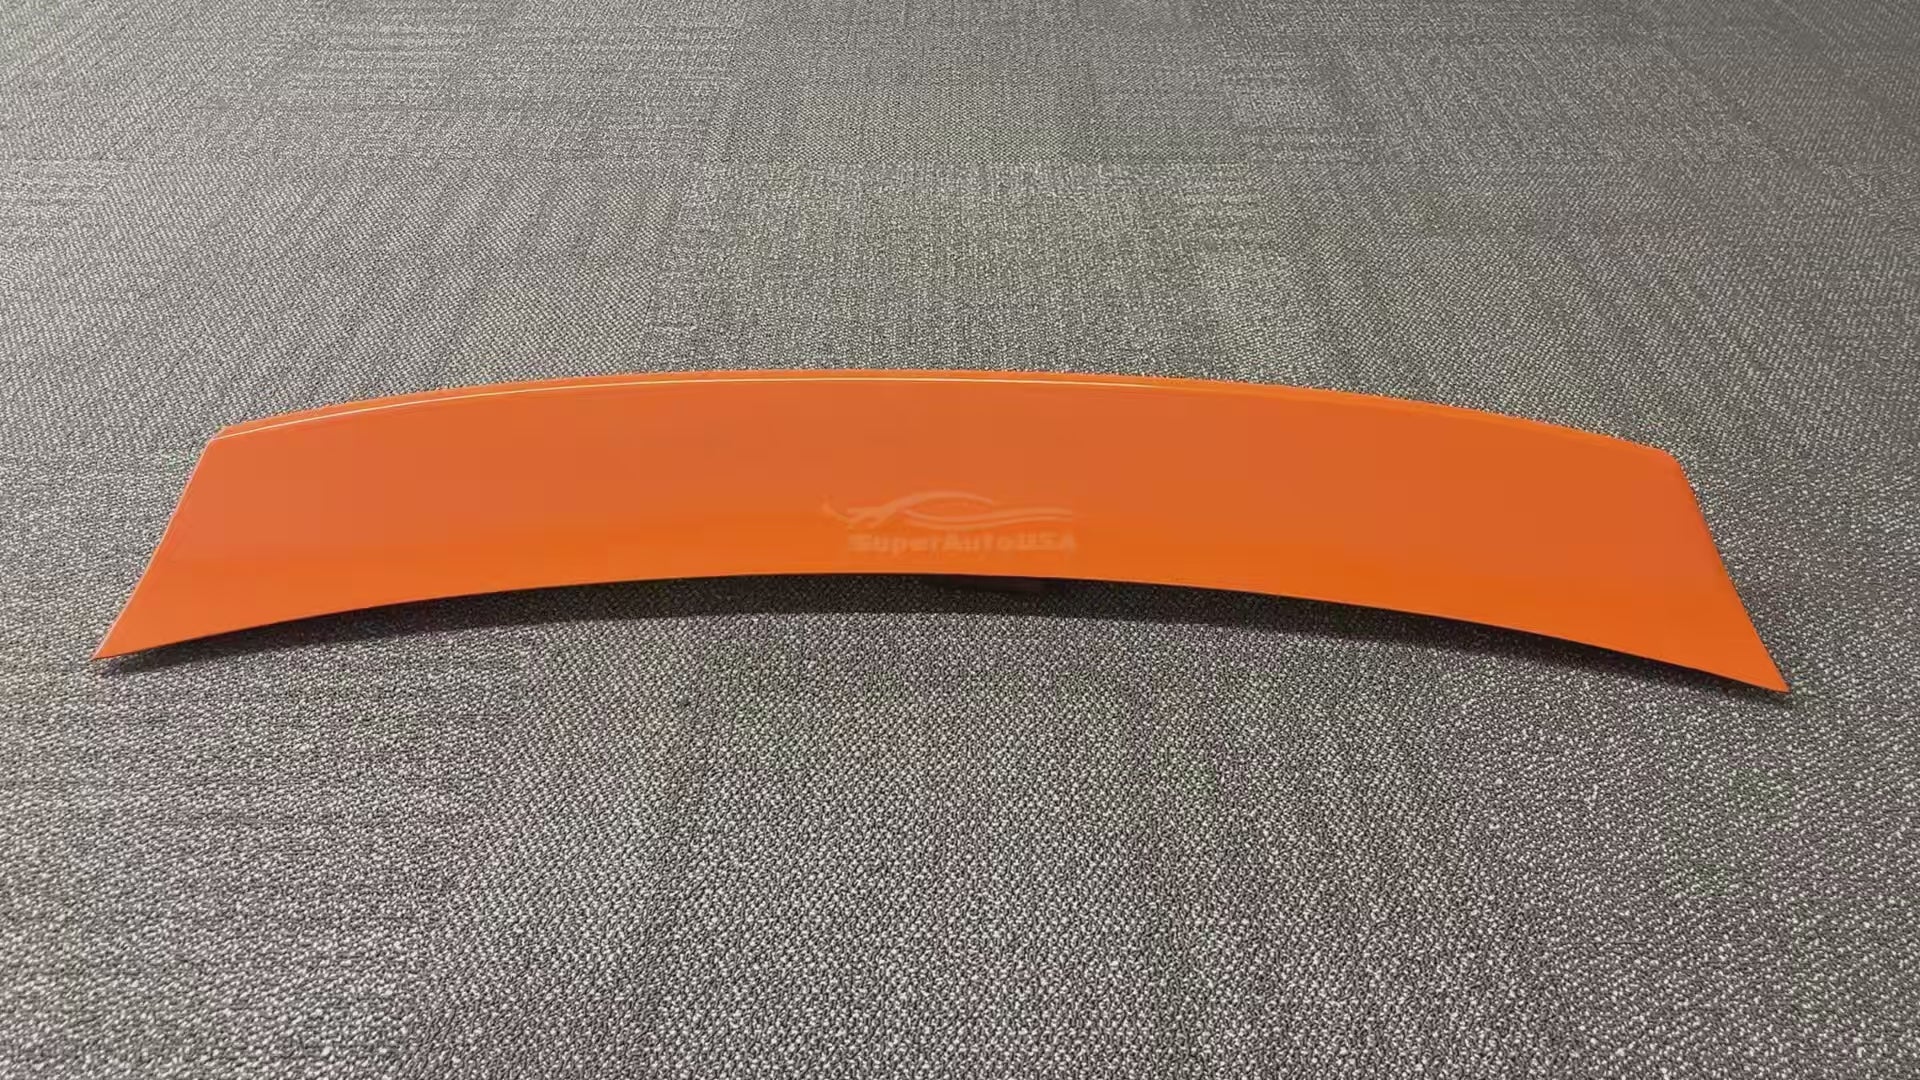 Close-up of the Duck Bill Low Profile Spoiler in Solar Orange Pearl on WRX STI 2022 2023 2024, showcasing the seamless color match and sleek design.